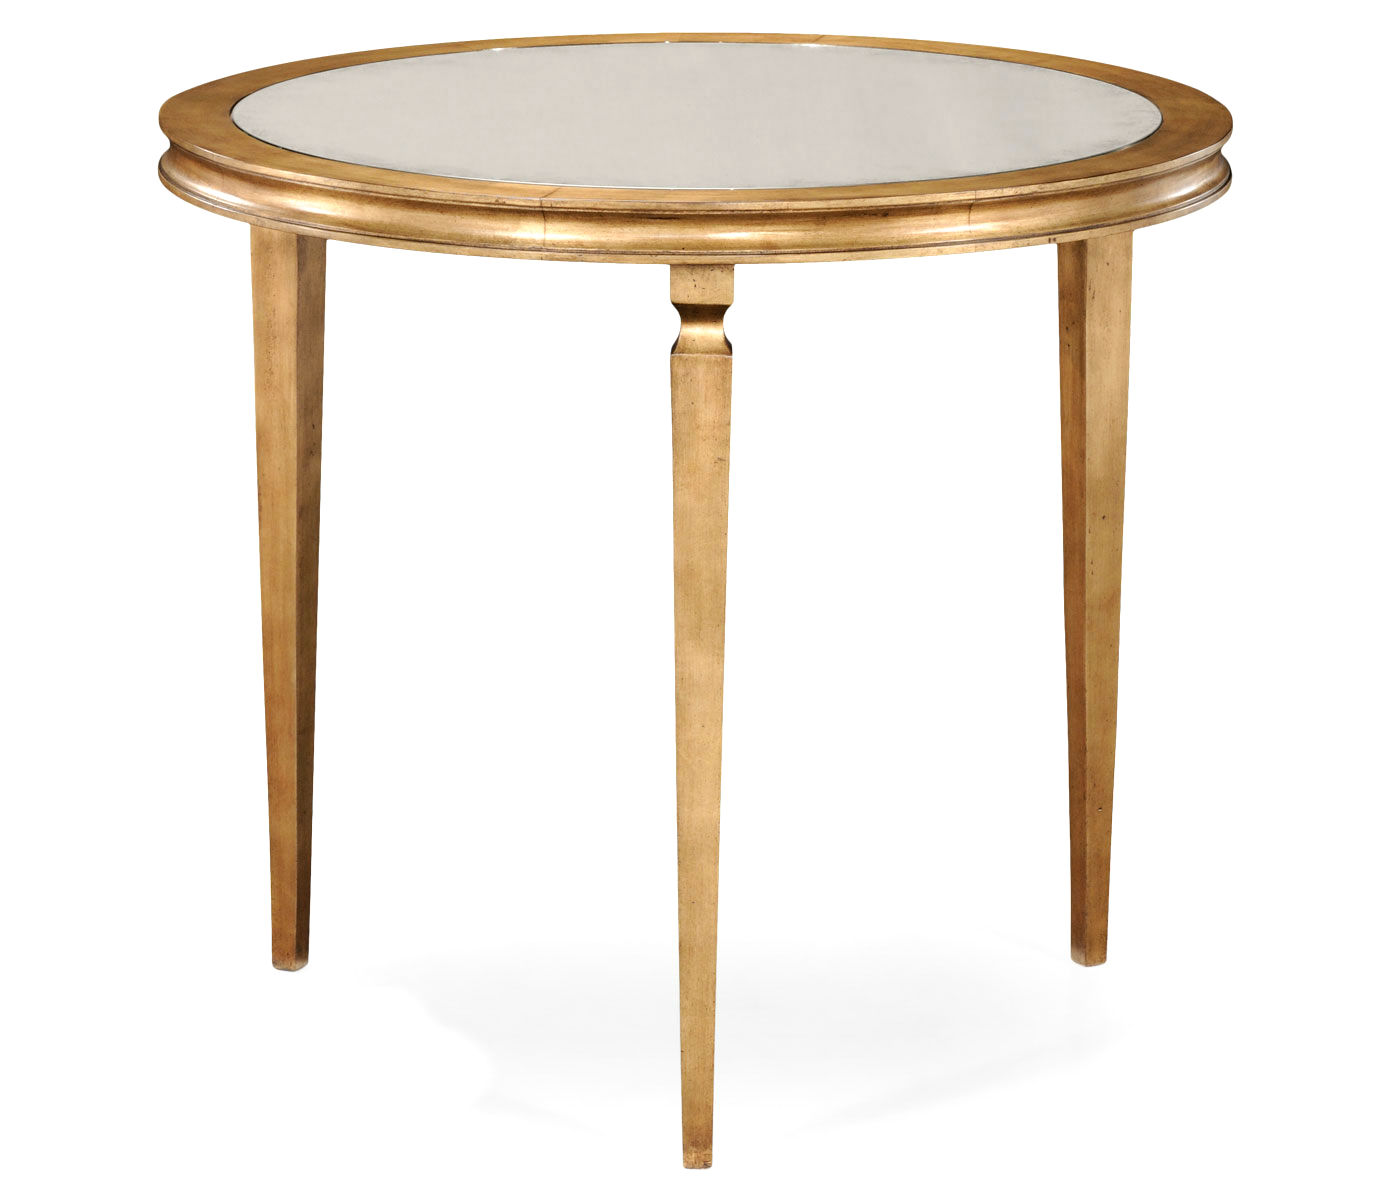 italian tables style gold side small accent table classic tall antique mirrored antiqued gilded partner end console coffee available hospitality grill tools pottery barn grapher